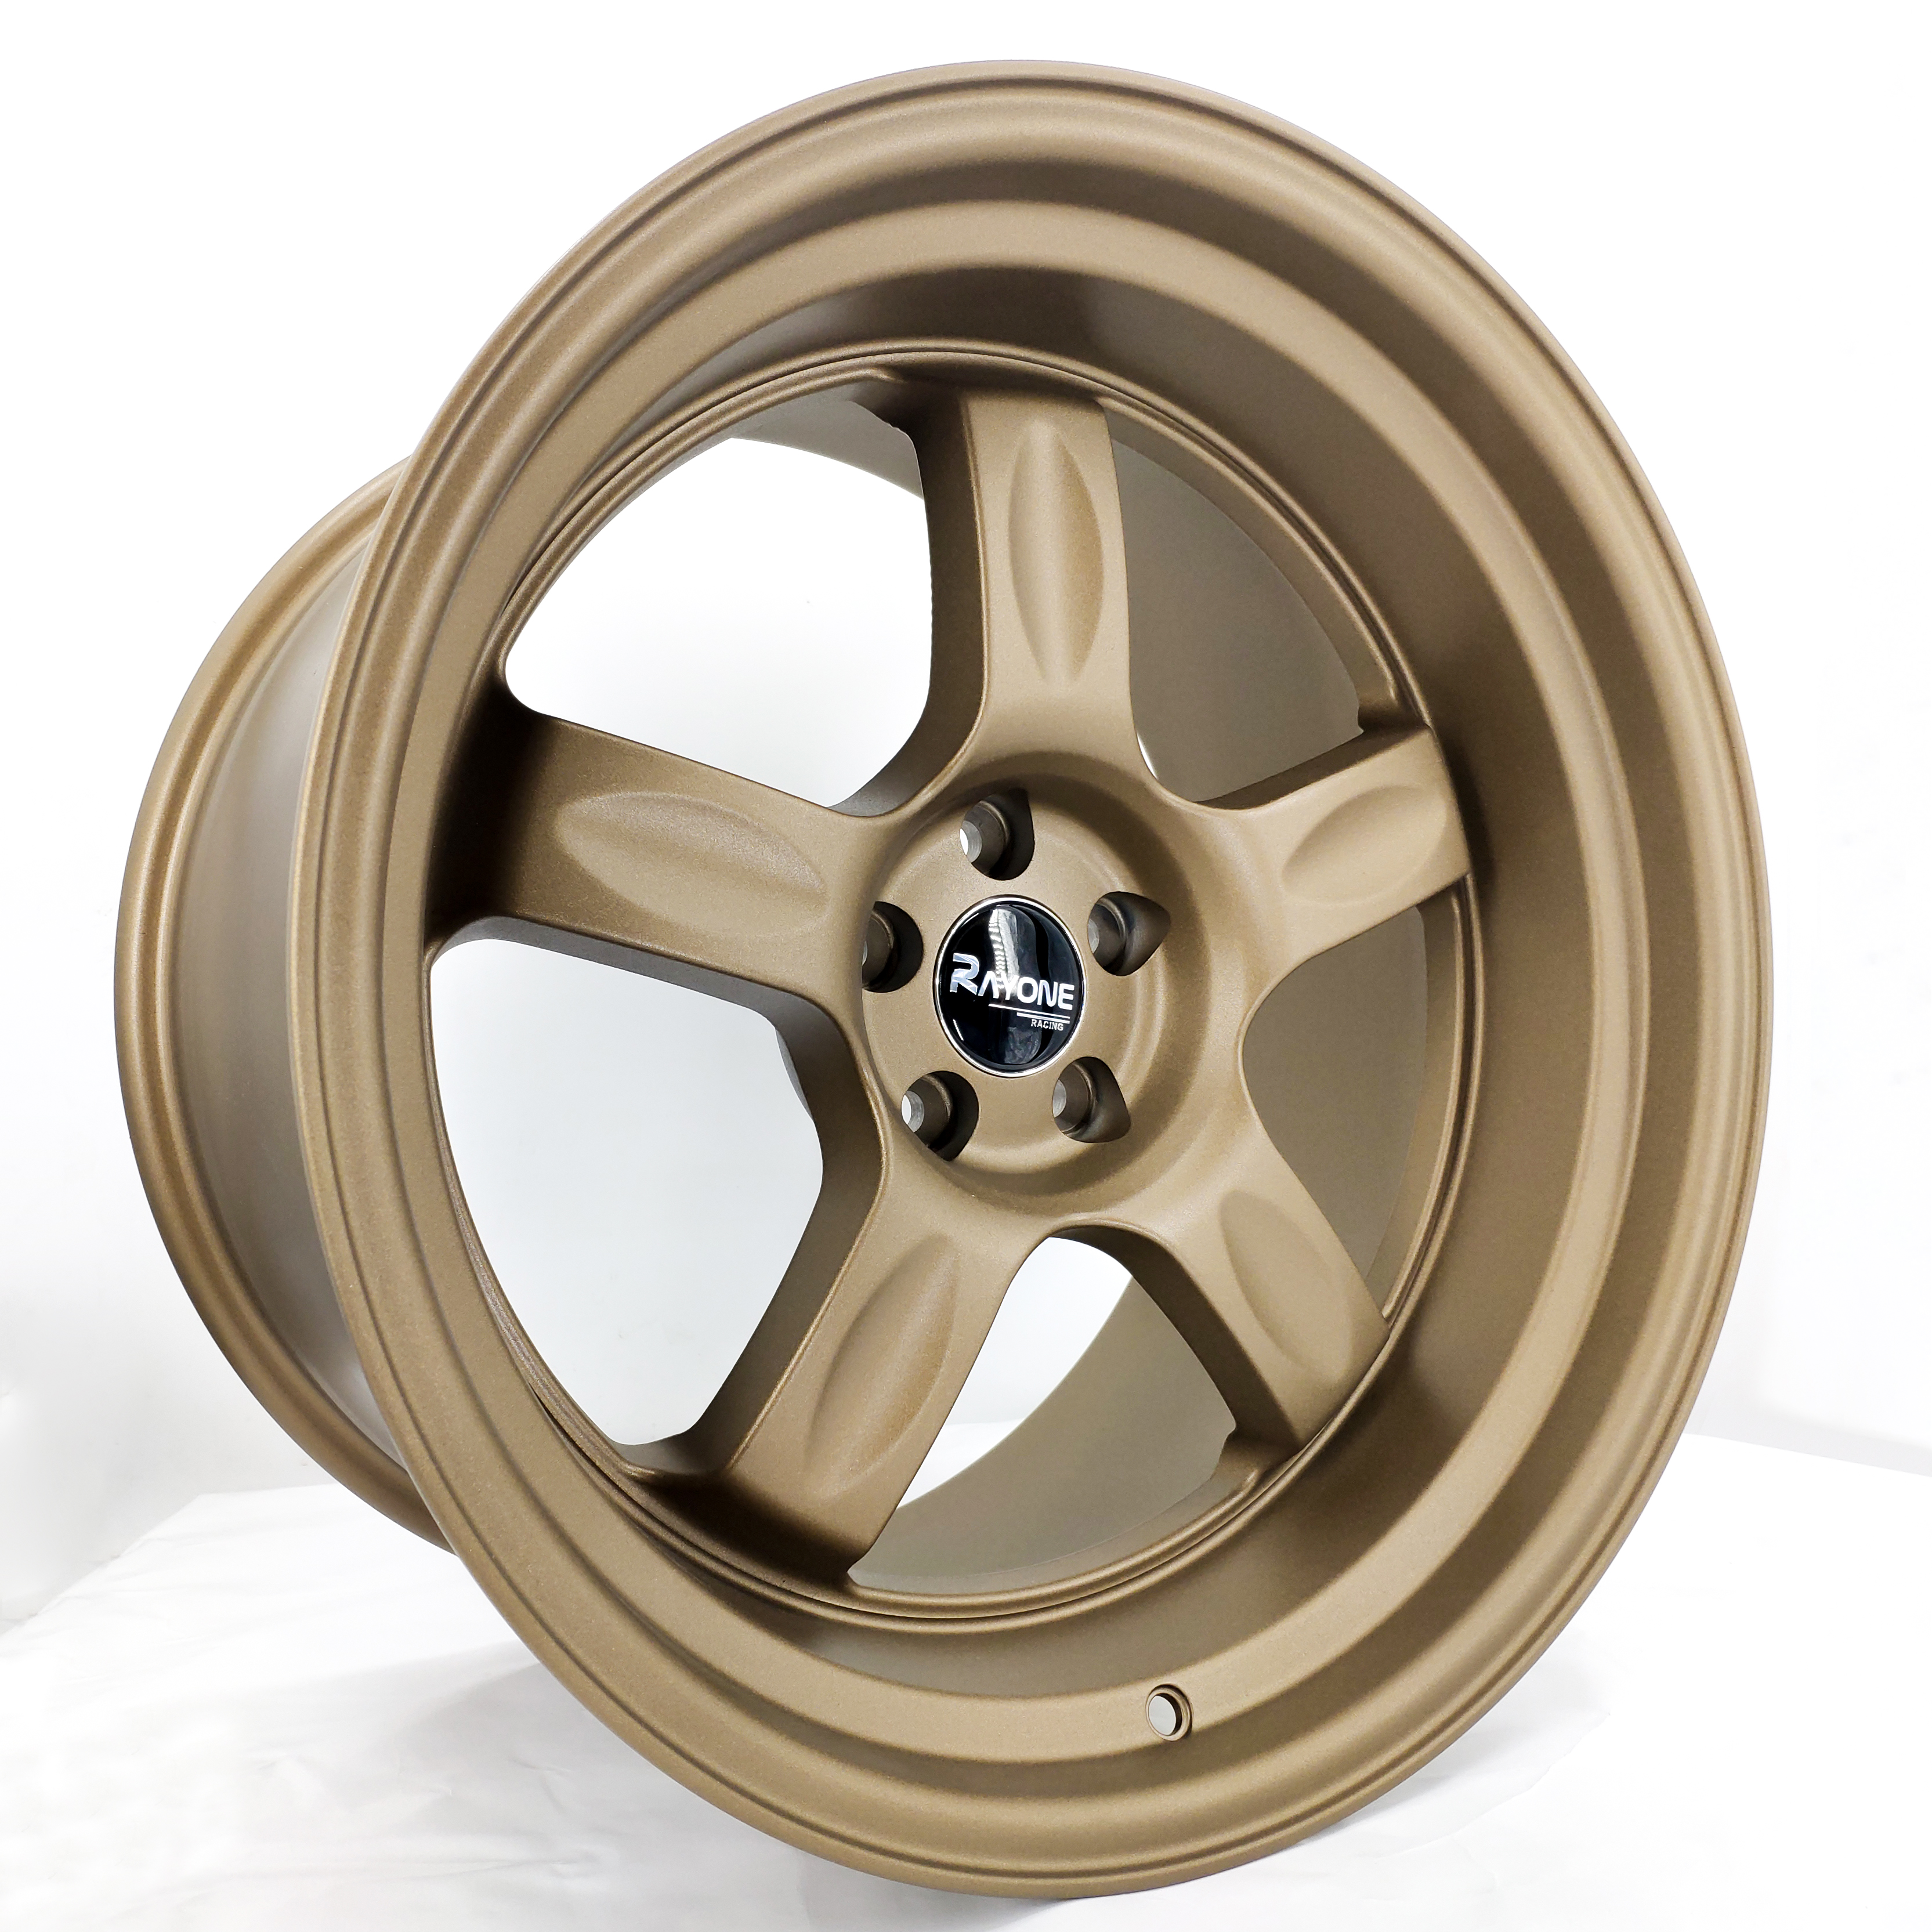 Chinese Professional Loma Forged Wheels - Rayone’s New Design 17/18inch 5 Spoke Aftermarket Rims – Rayone